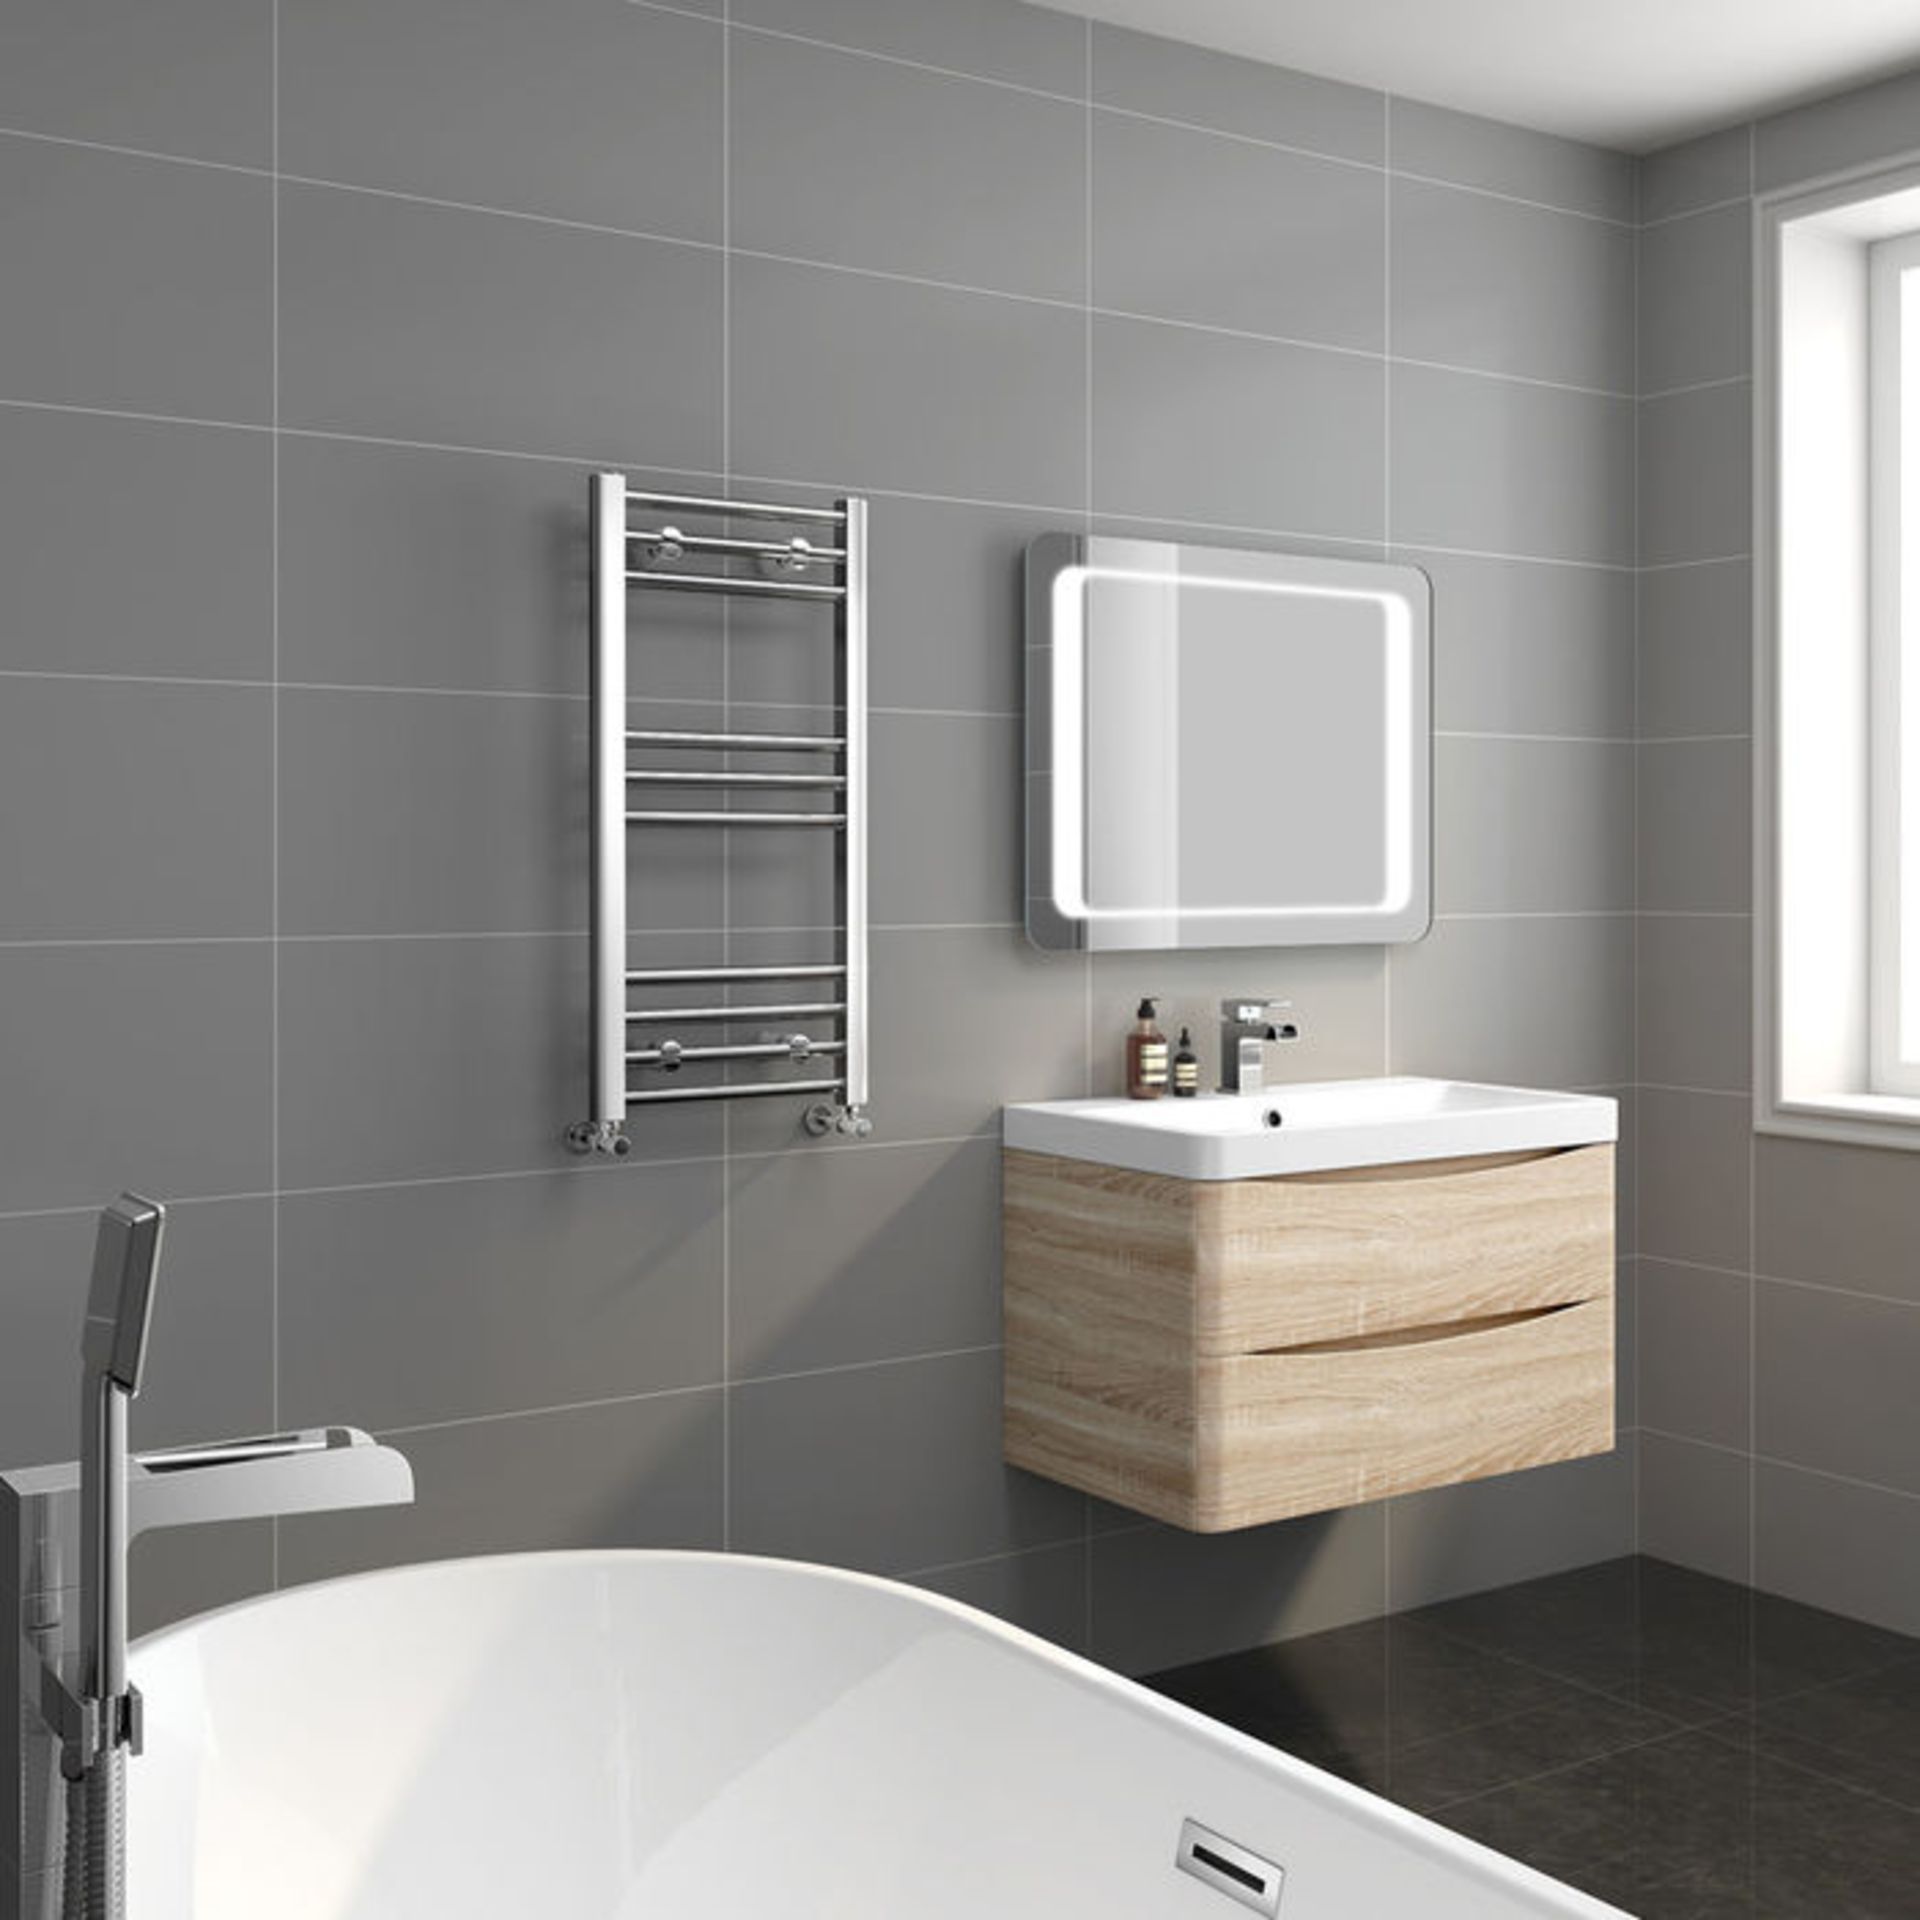 (TY49) 700x400mm - 20mm Tubes - Chrome Heated Straight Rail Ladder Towel Radiator. Low carbon - Image 2 of 3